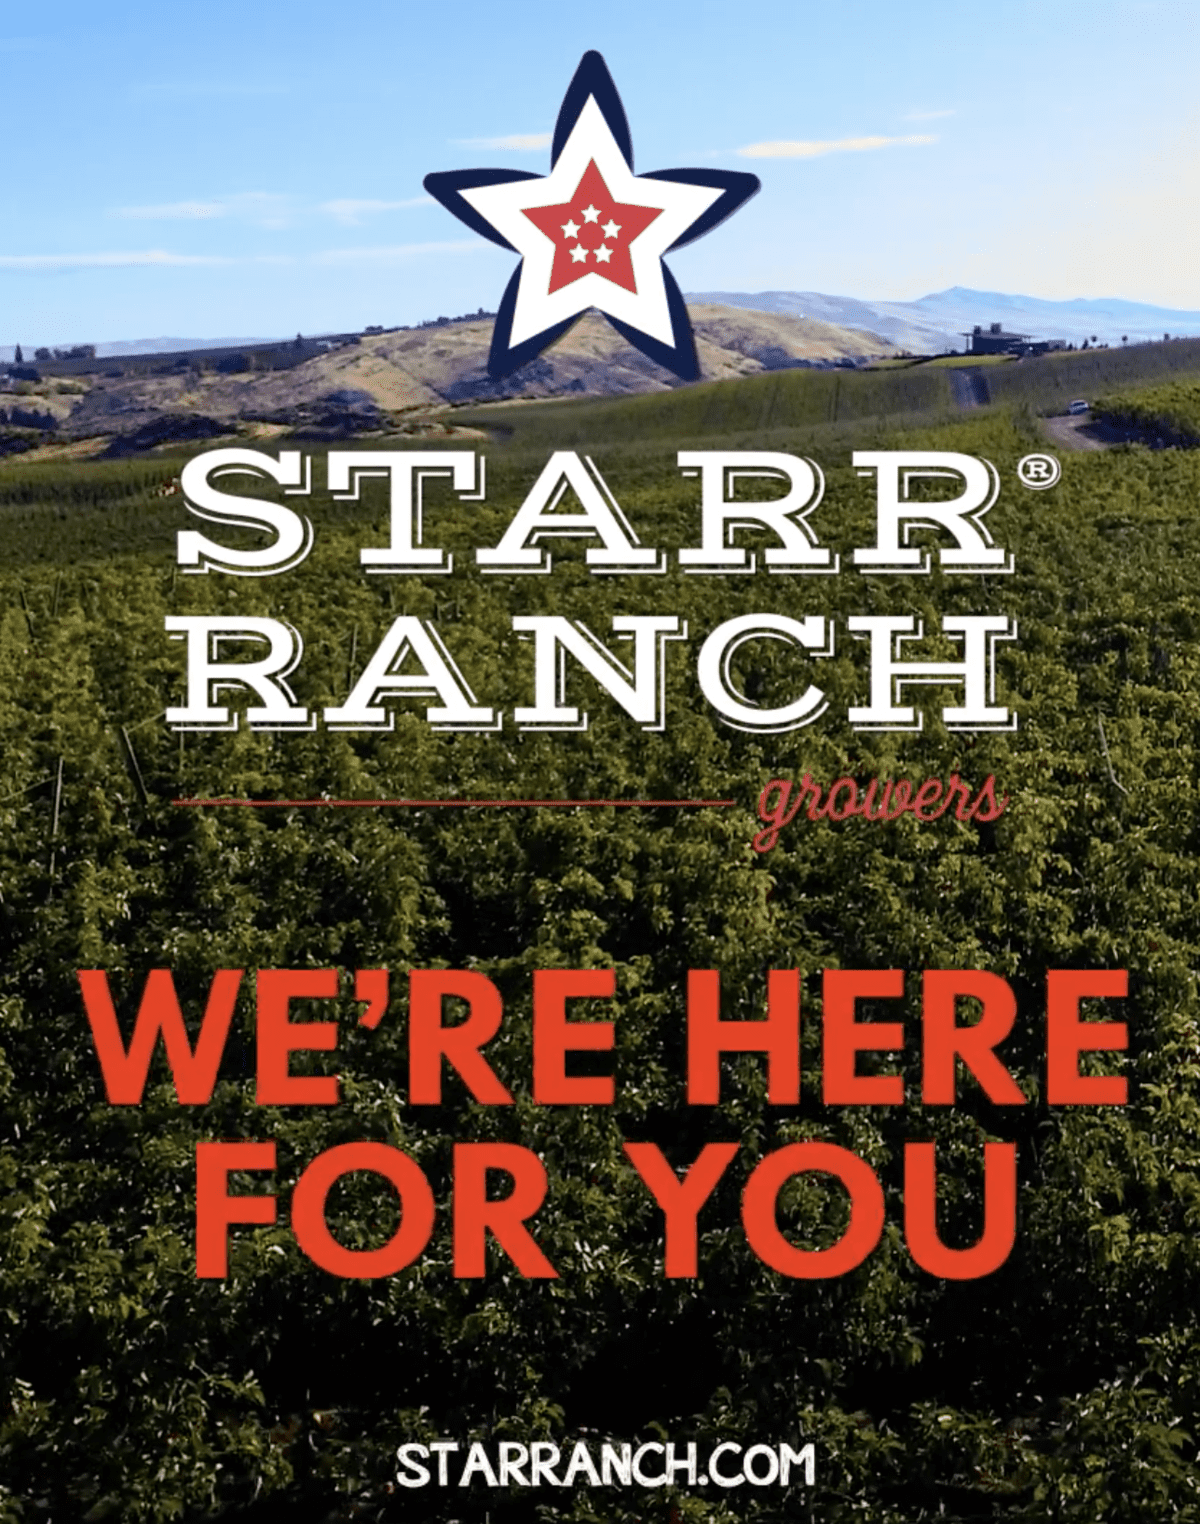 Starr Ranch Growers: Here For You